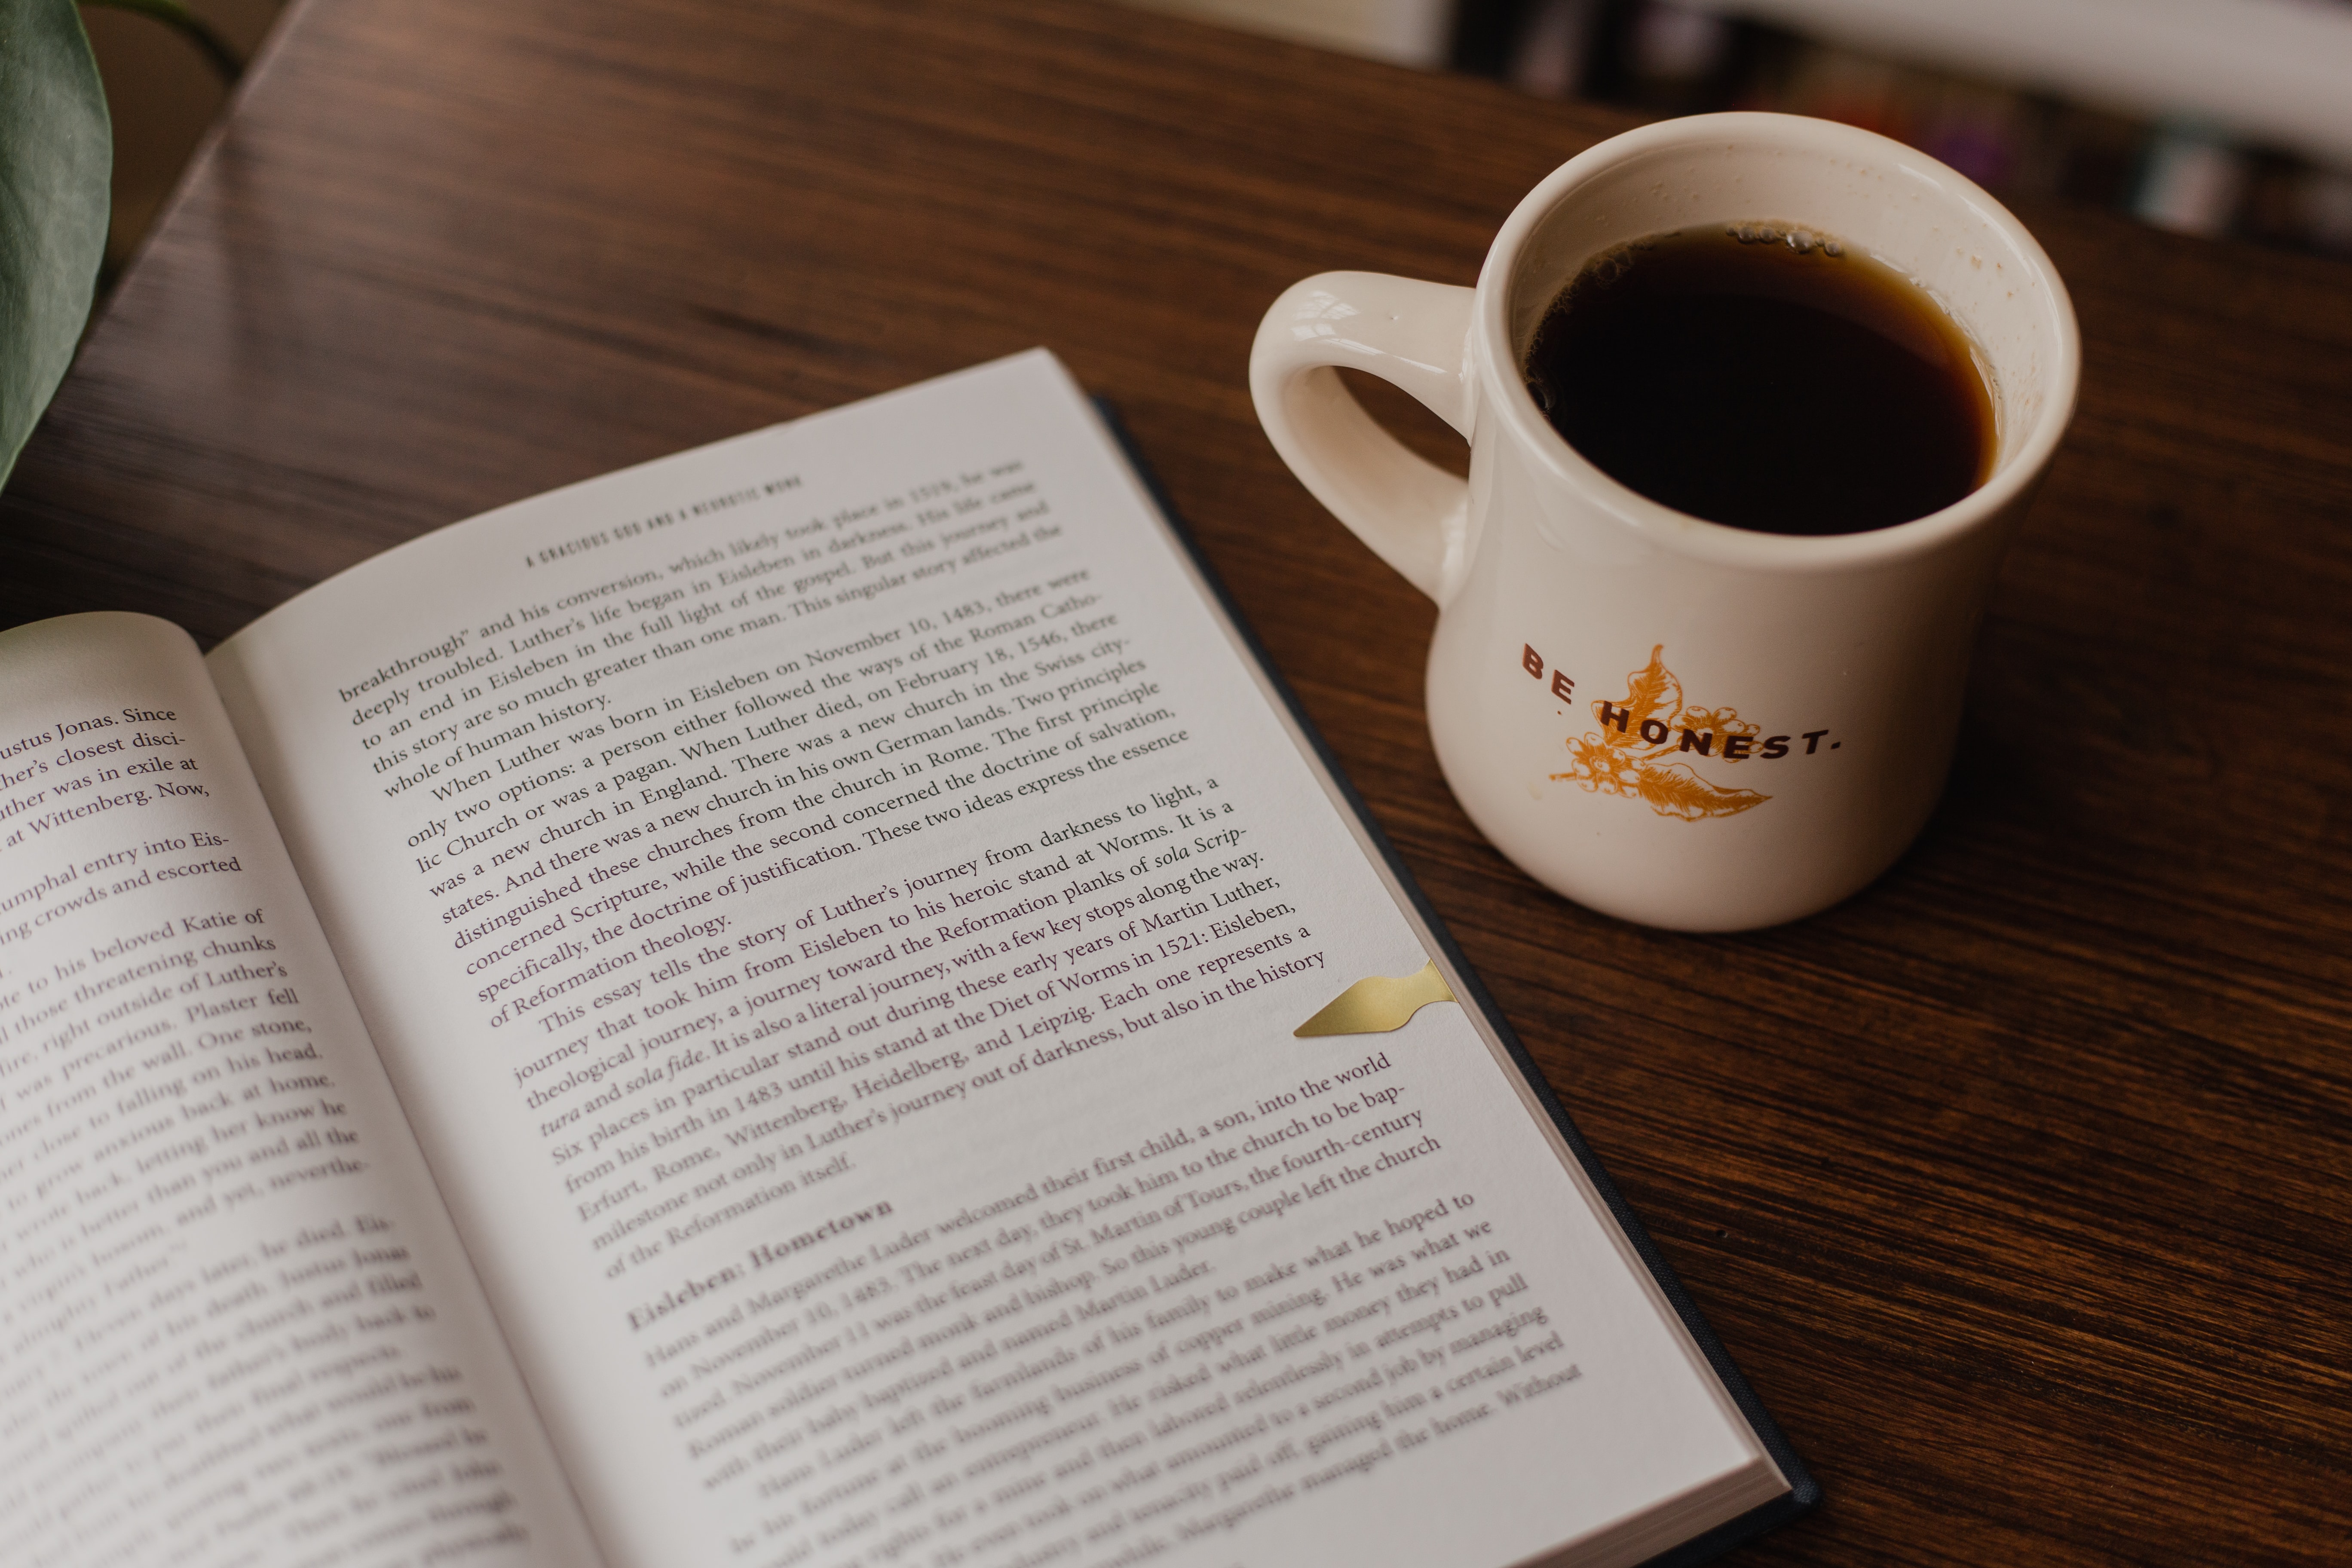 Open book with mug of coffee. The mug has "be honest" written on it